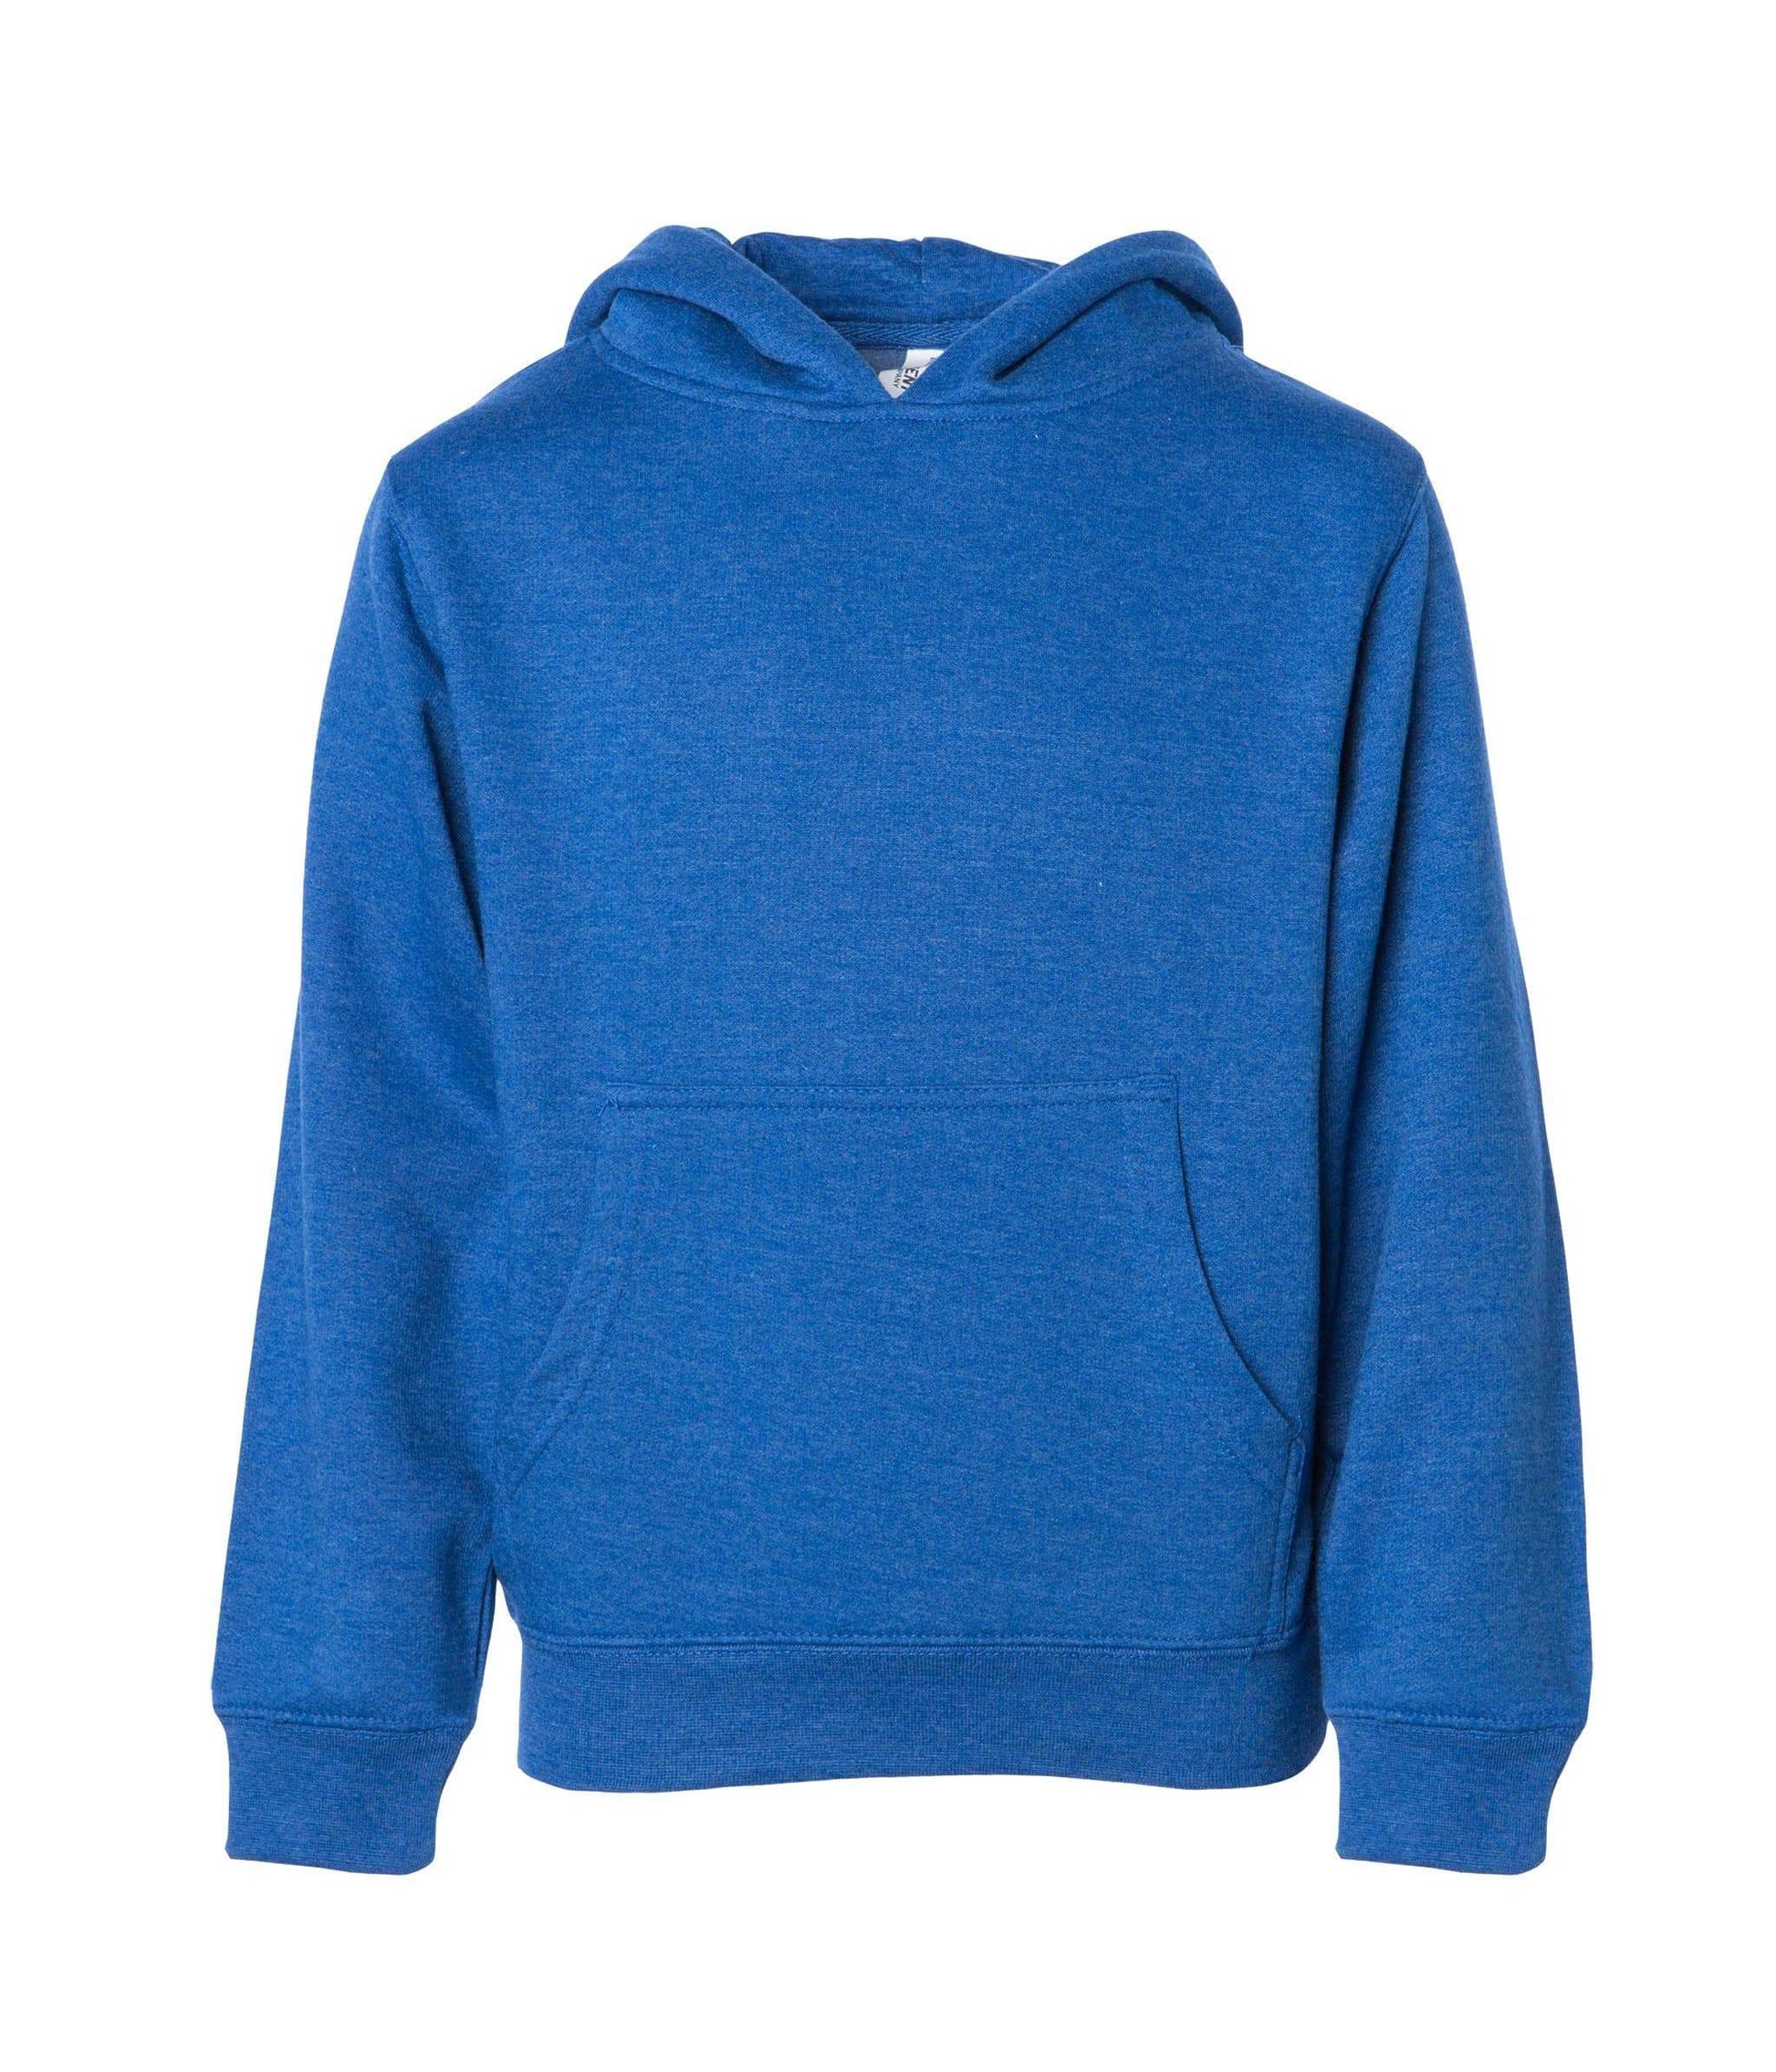 SS4001Y Youth Midweight Pullover Hooded Sweatshirt - Royal